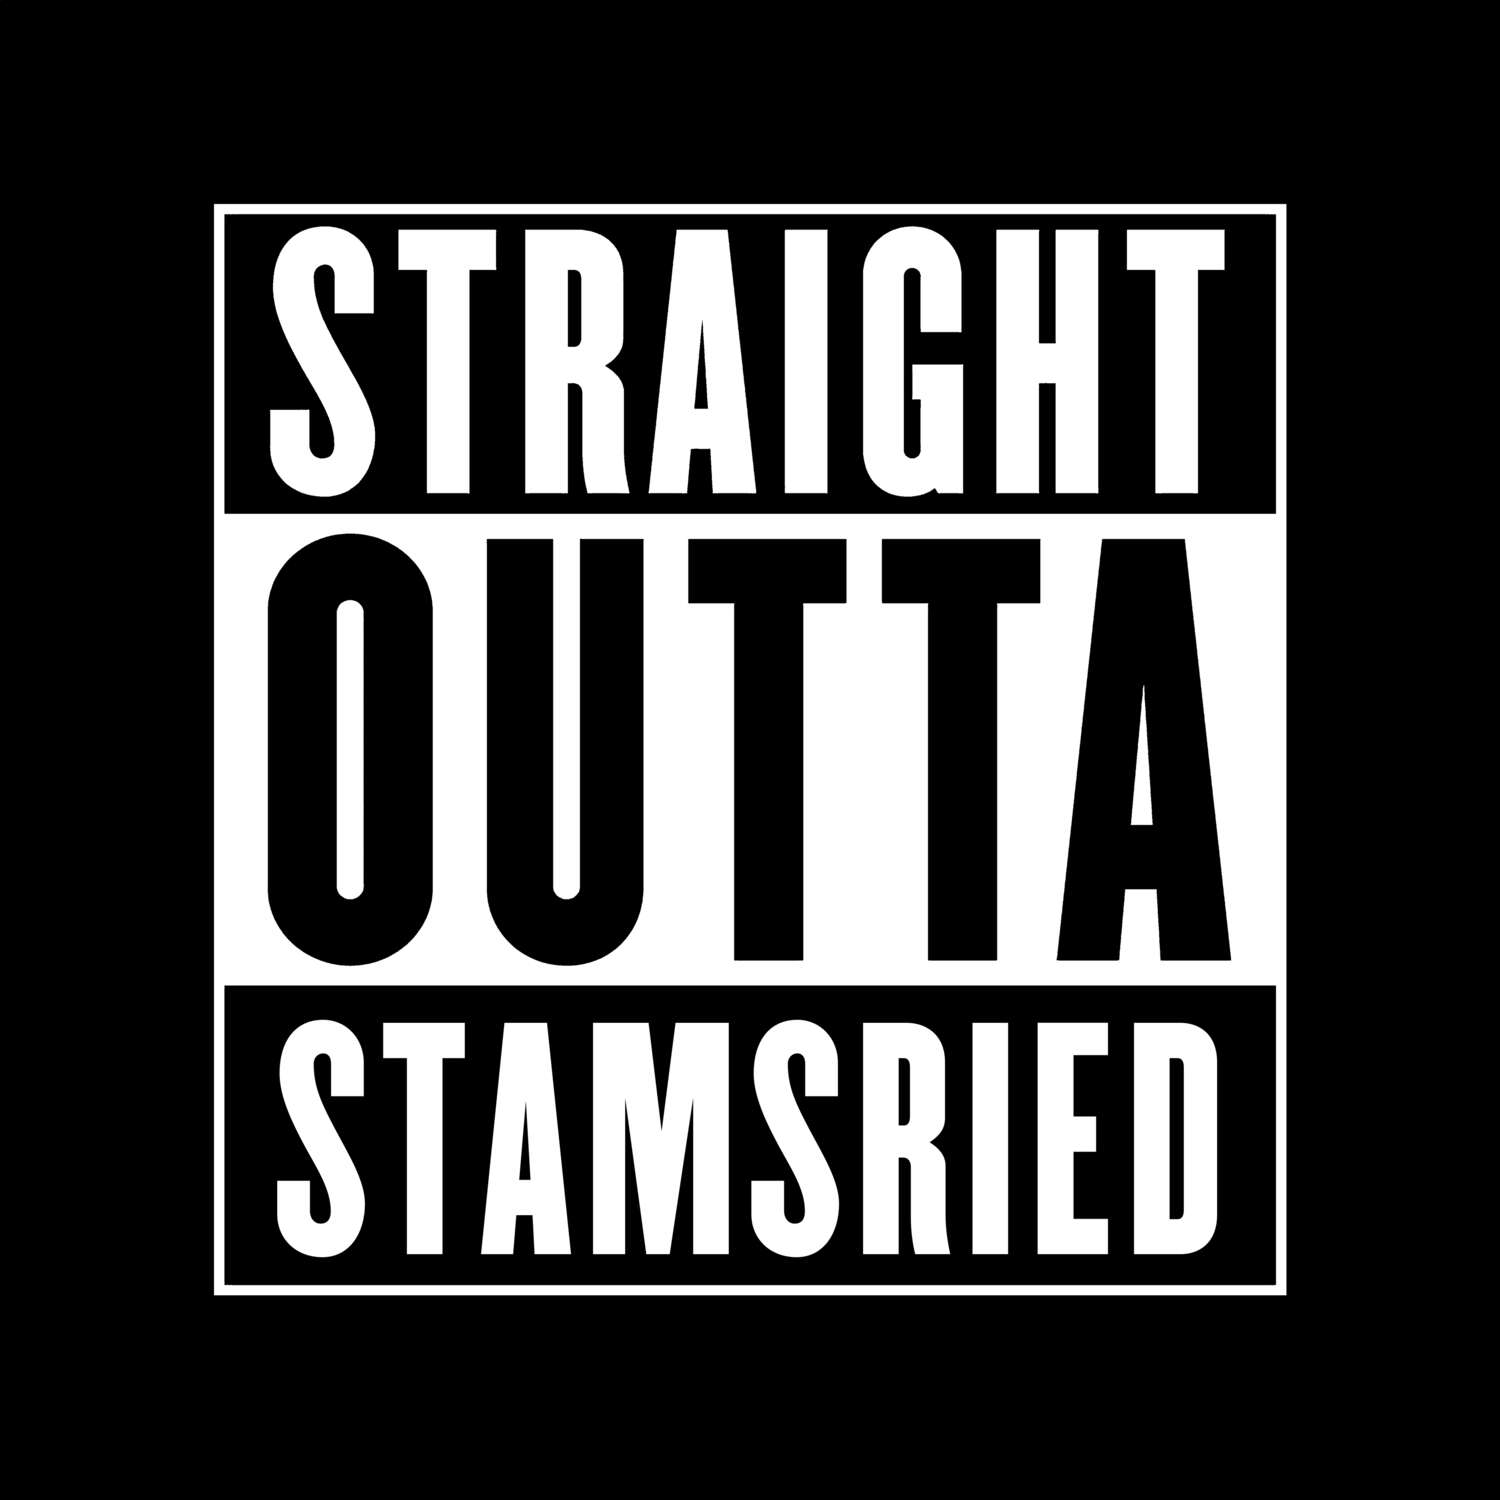 Stamsried T-Shirt »Straight Outta«